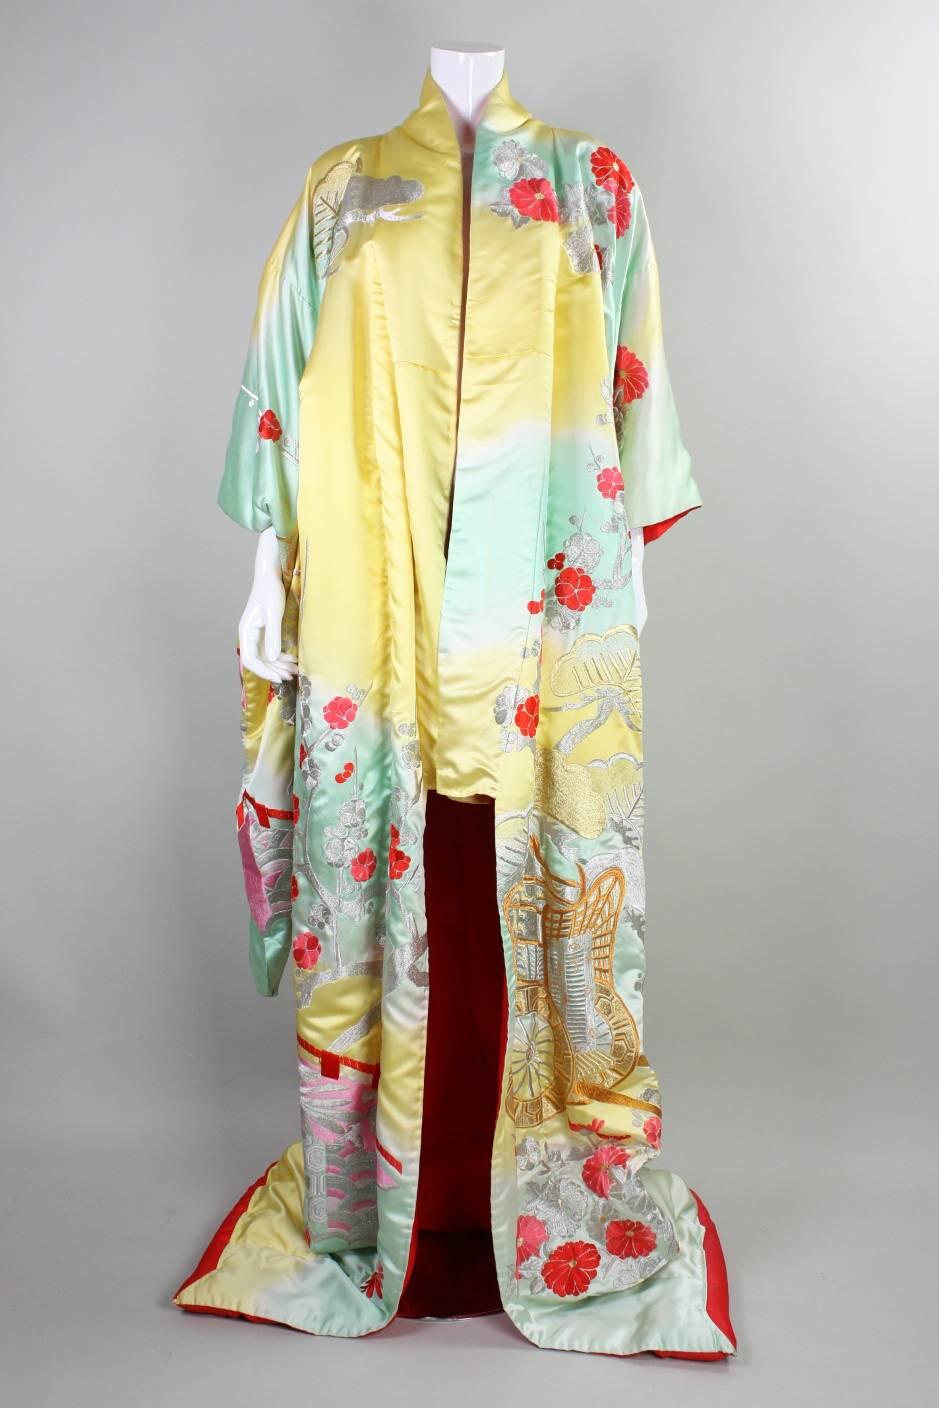 Vintage Japanese kimono features gorgeous polychromatic floral embroidery on an ombre silk ground that ranges from yellow to white to sea foam green. Padded hem. No closures. Kimono dates to an unknown era during the 20th century.